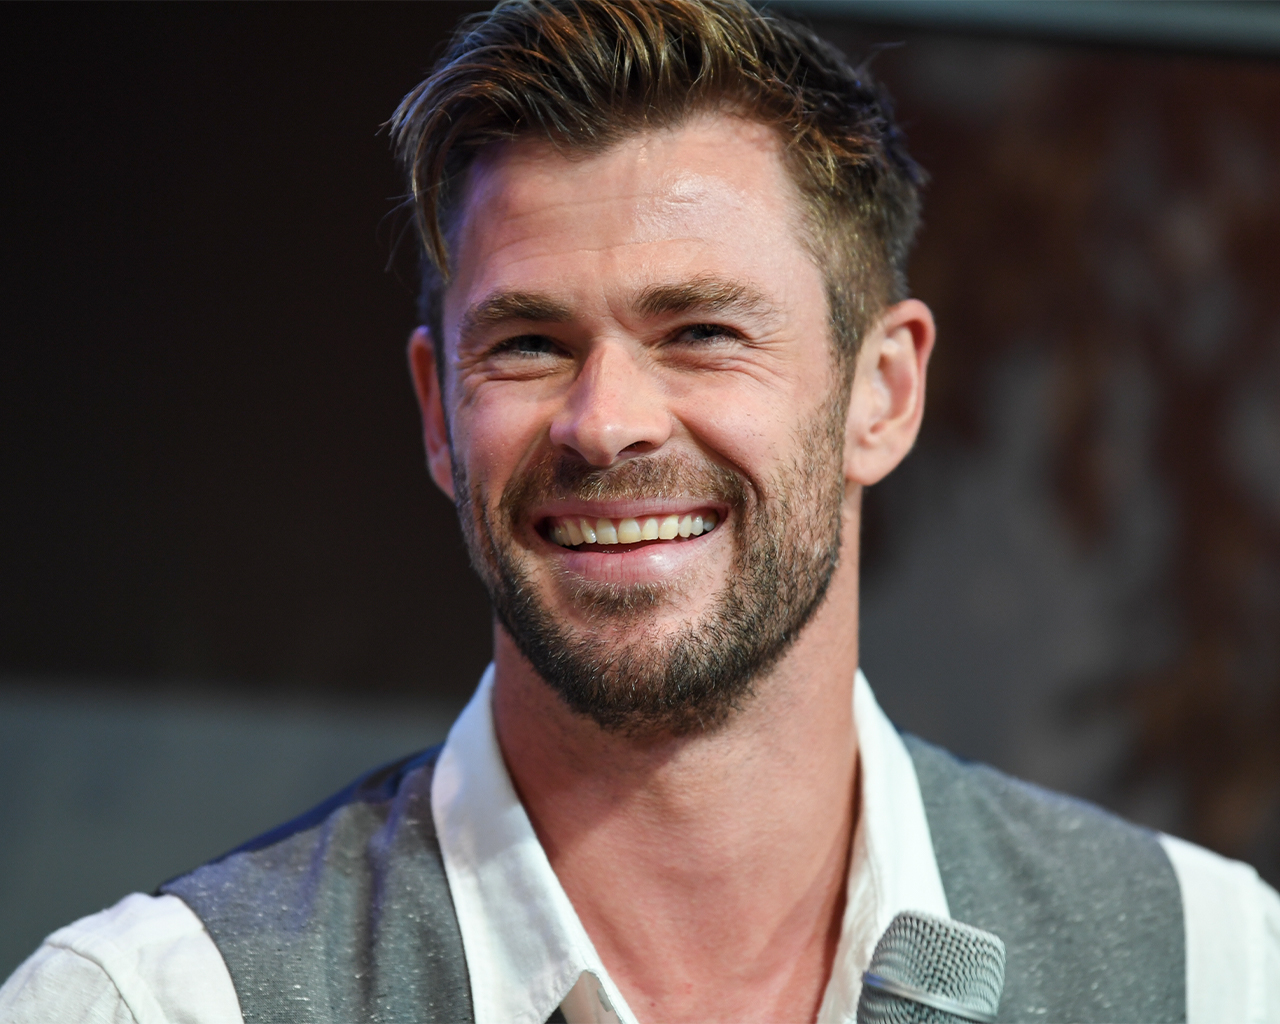 CHRIS HEMSWORTH’S SON SHADED THOR IN THE BEST WAY